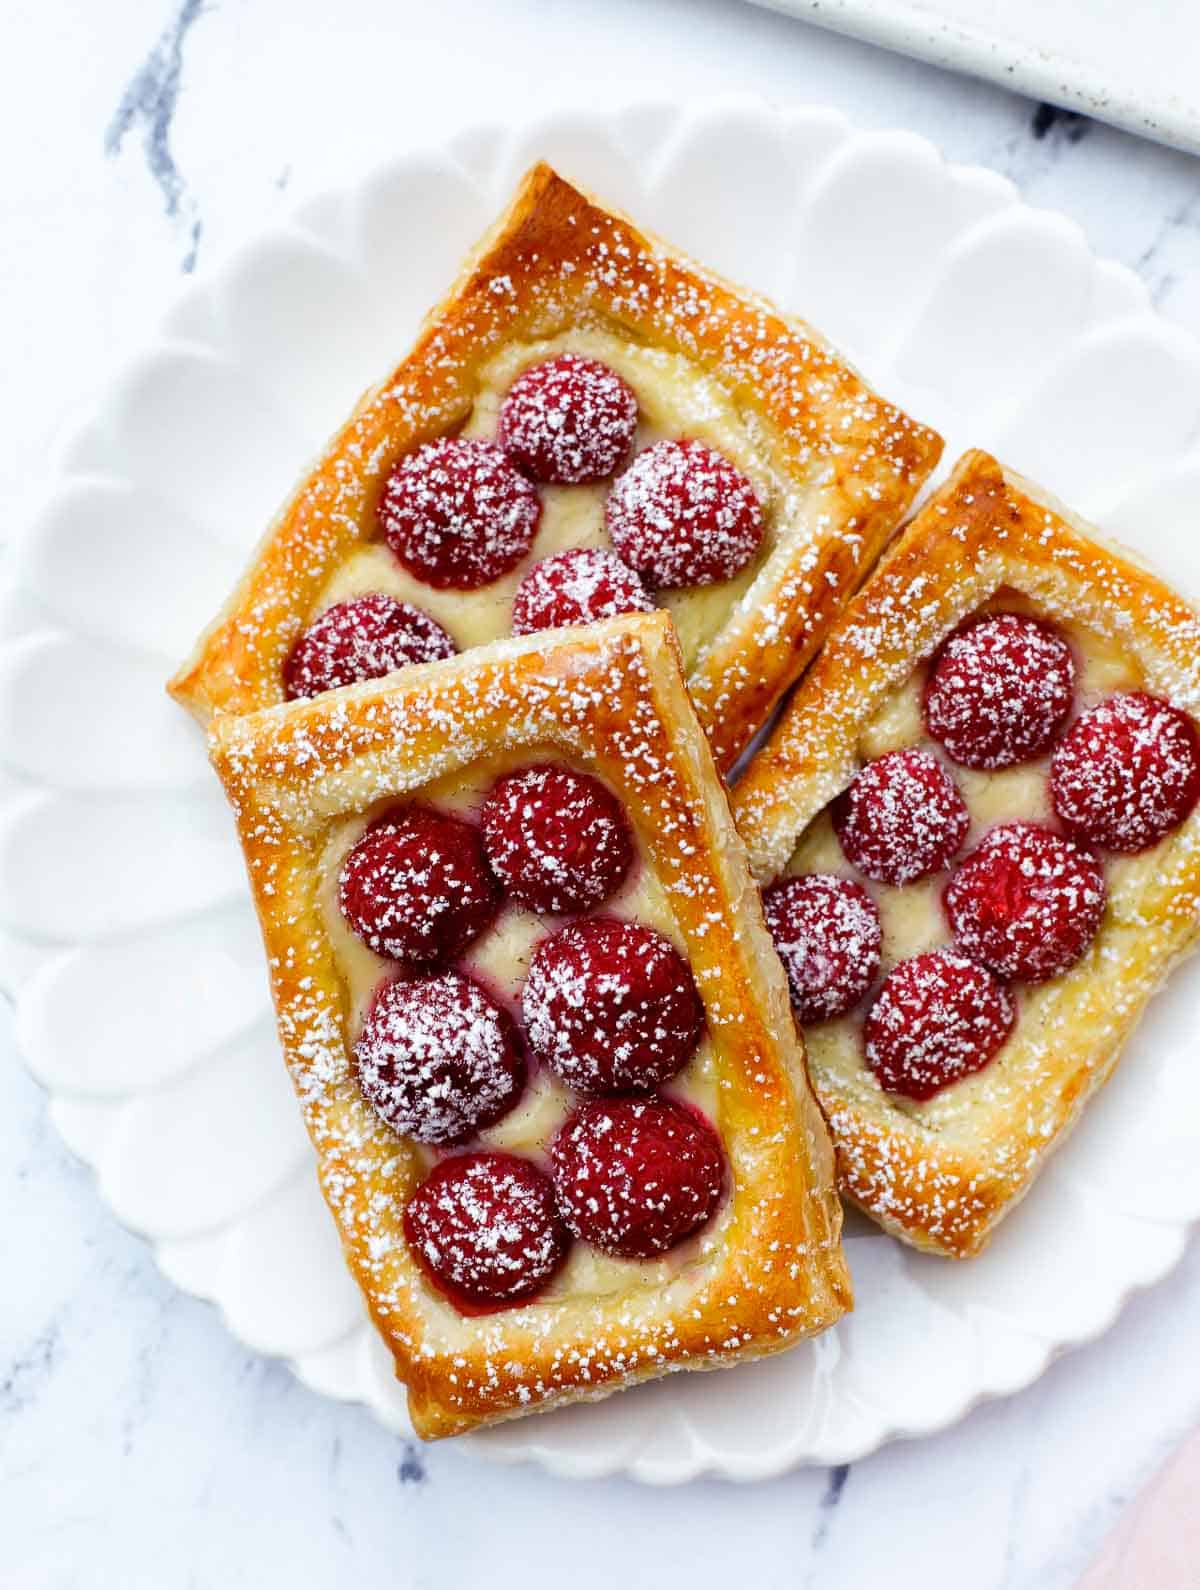 raspberry tart baked on a plate, dusted with powdered sugar